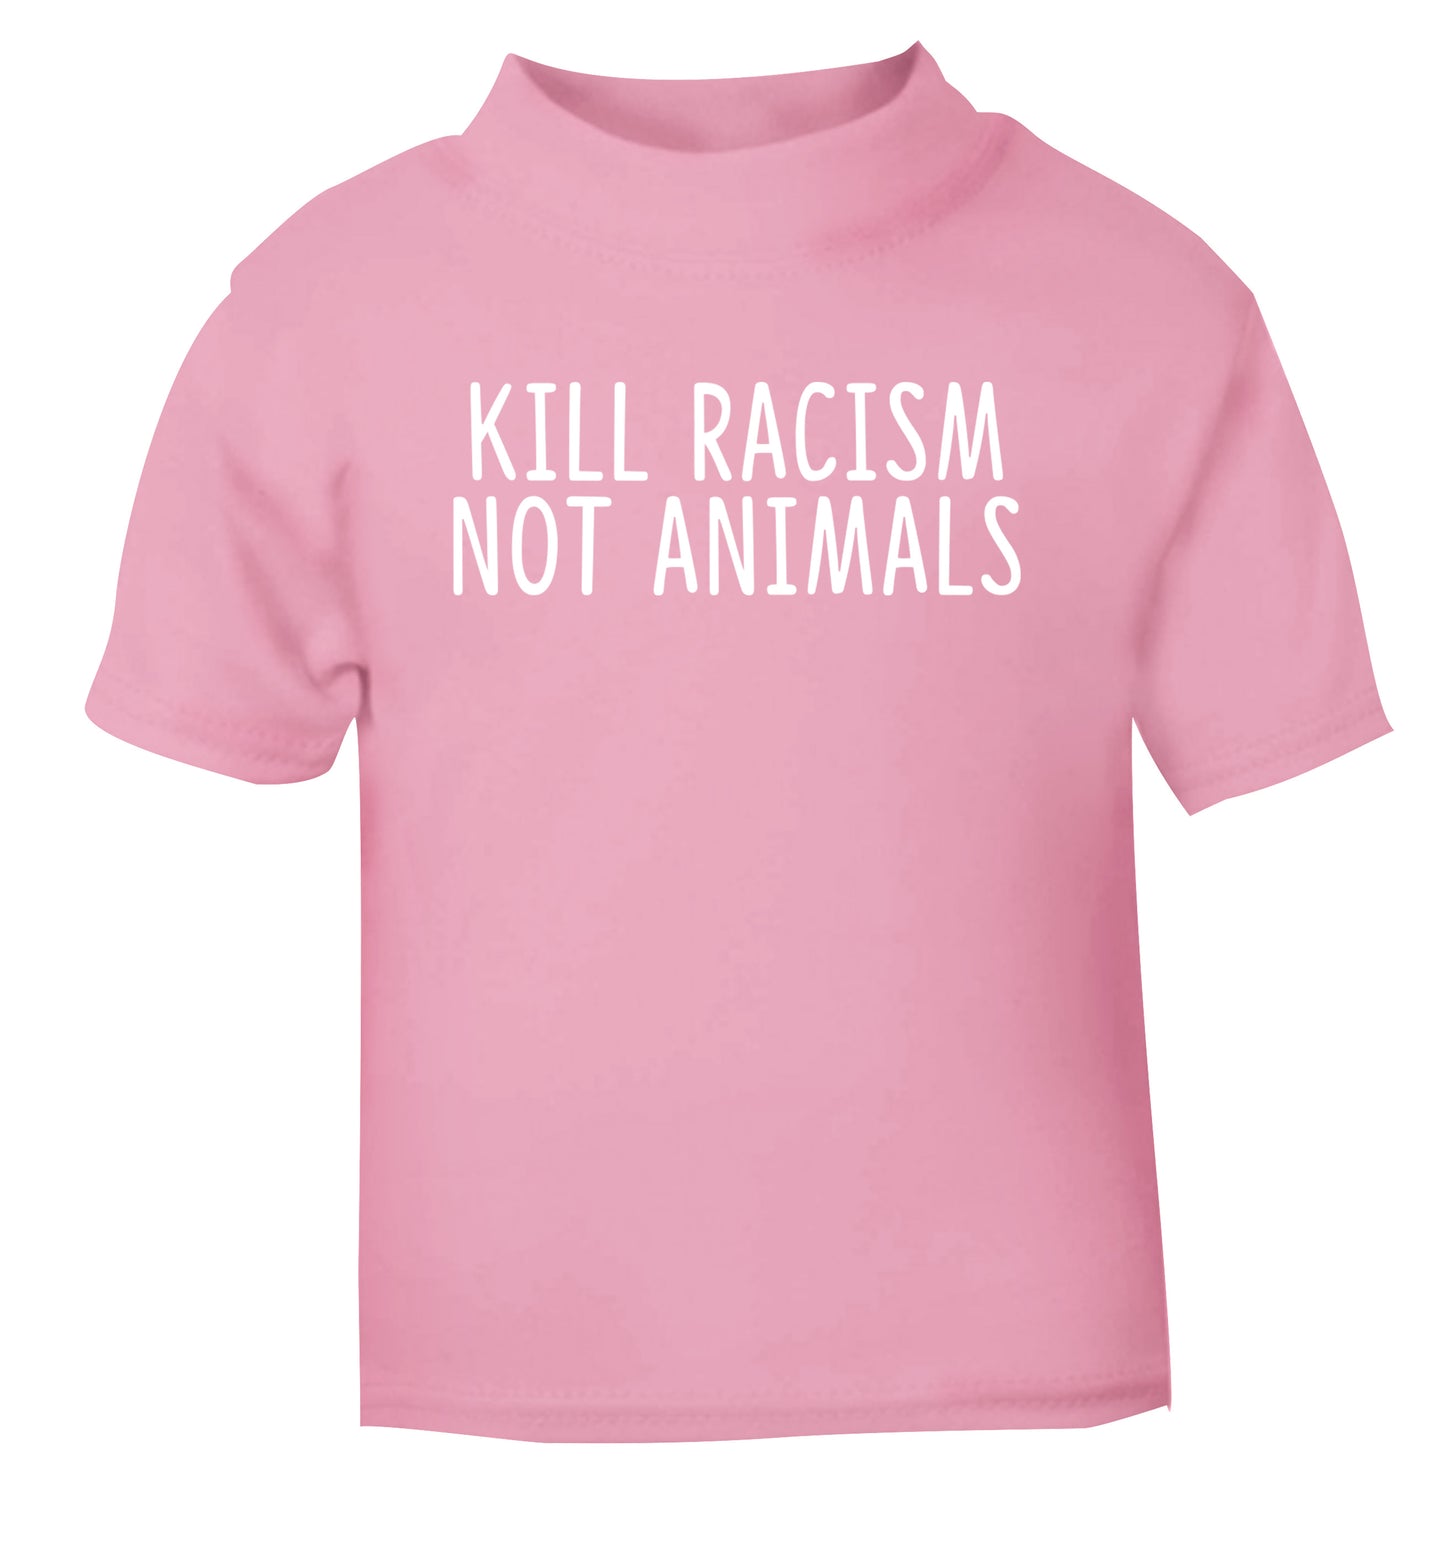 Kill Racism Not Animals light pink Baby Toddler Tshirt 2 Years